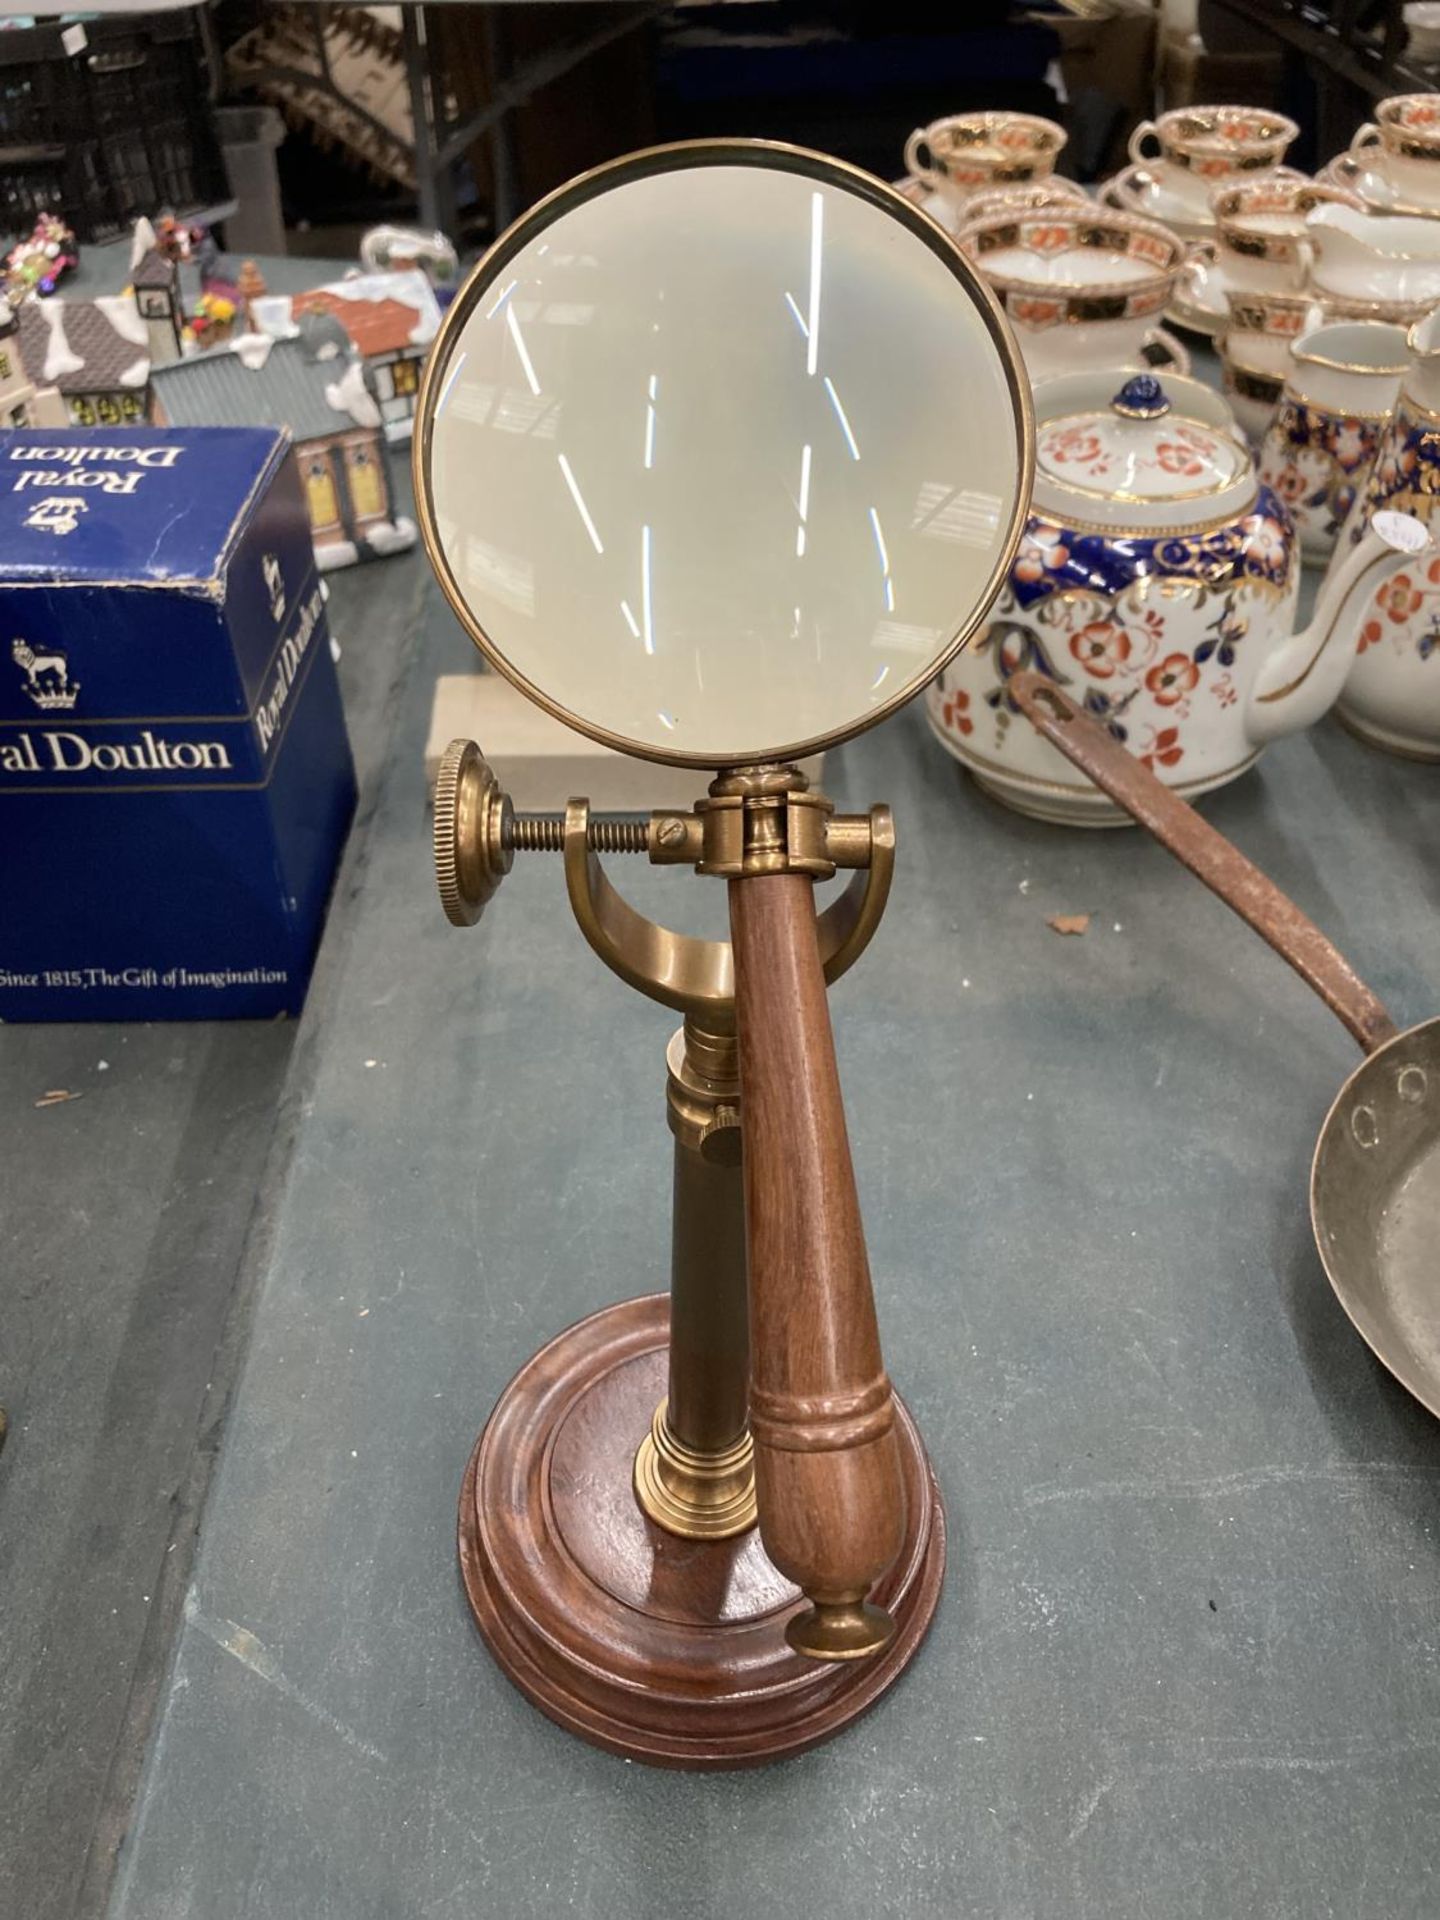 A BRASS MAGNIFYING GLASS ON A GLASS STAND AND WOODEN BASE - Image 2 of 3